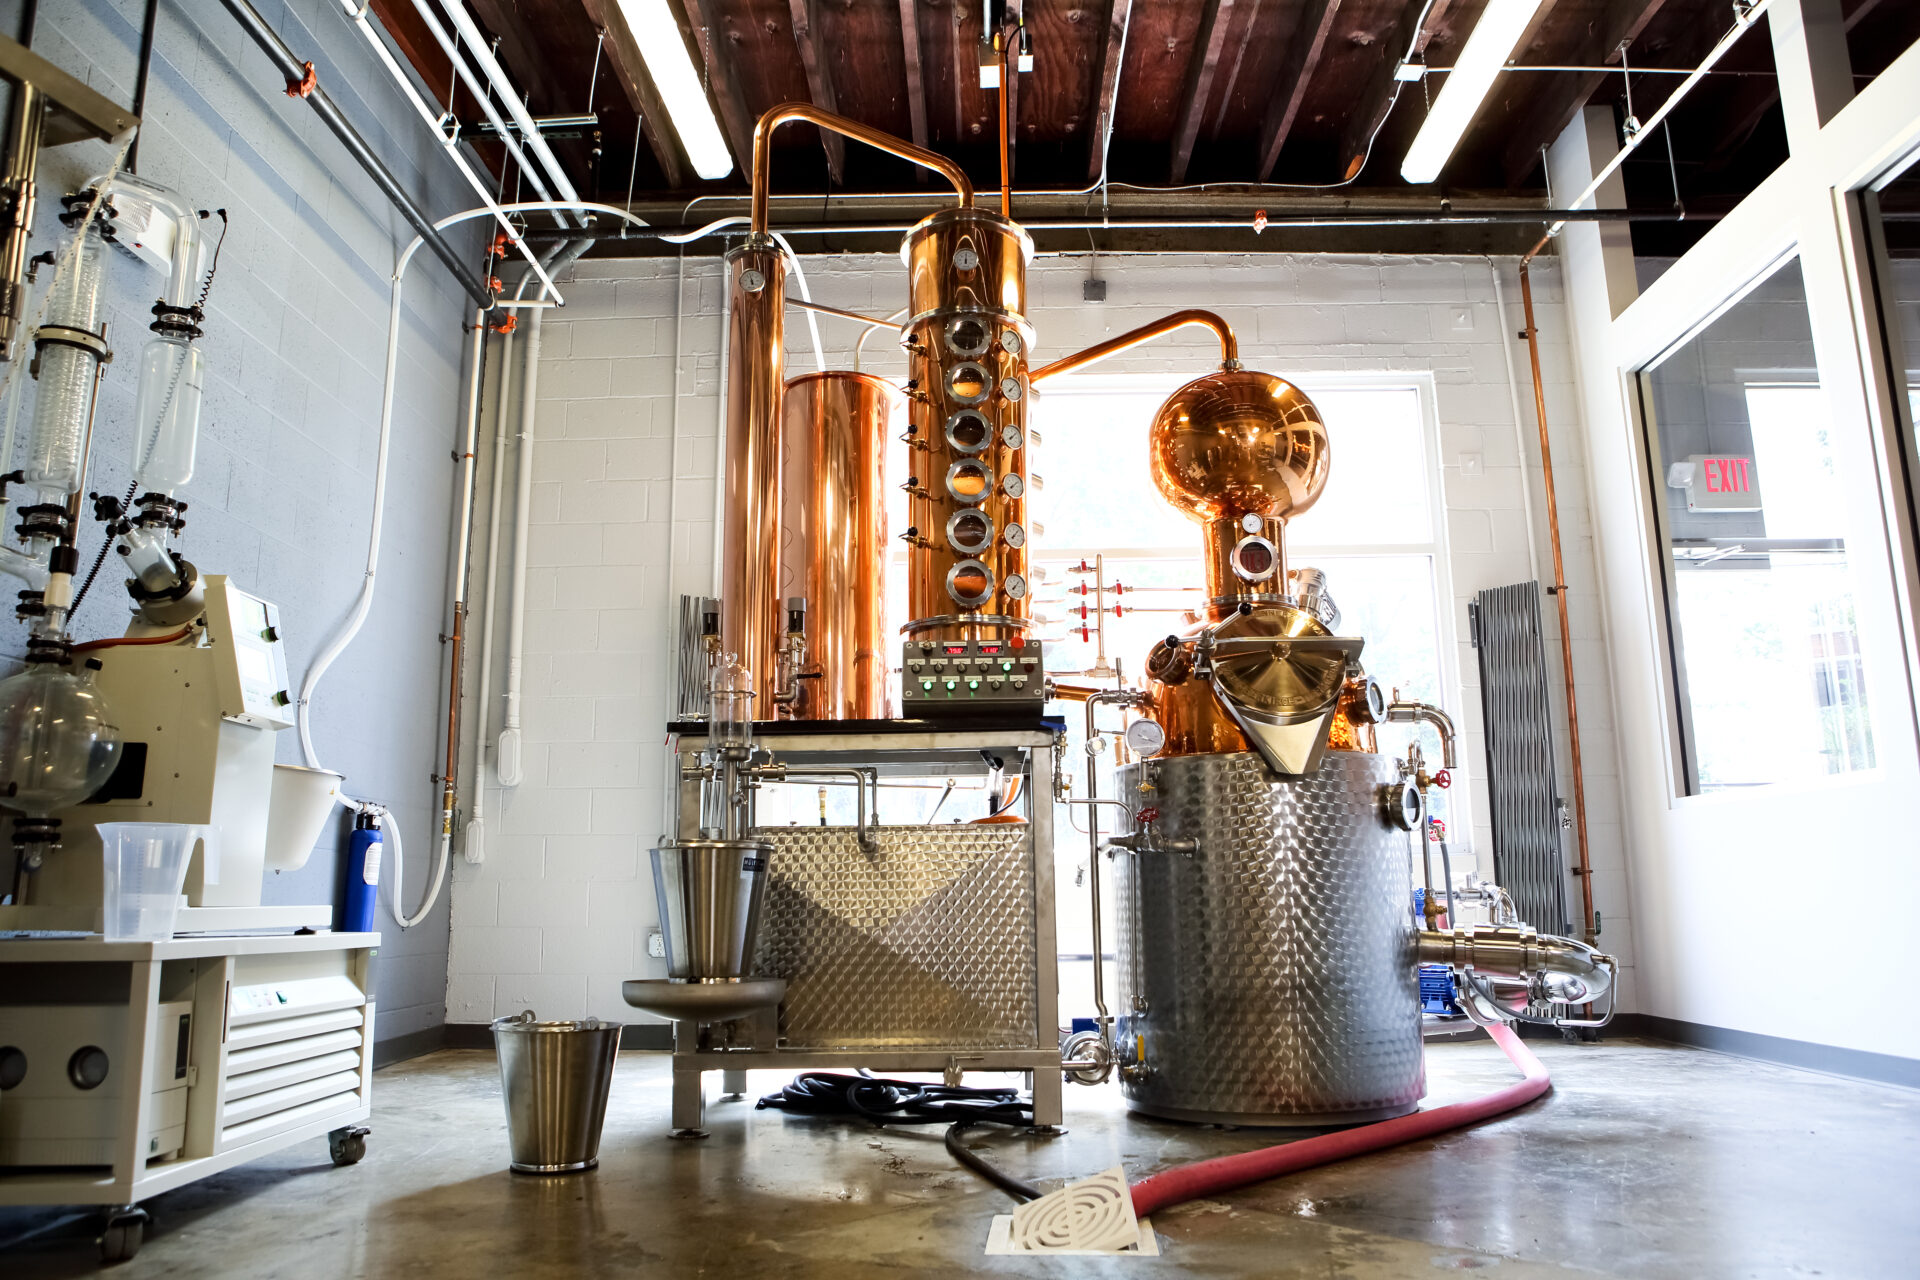 Gertrude, the gin still for Conniption Gin